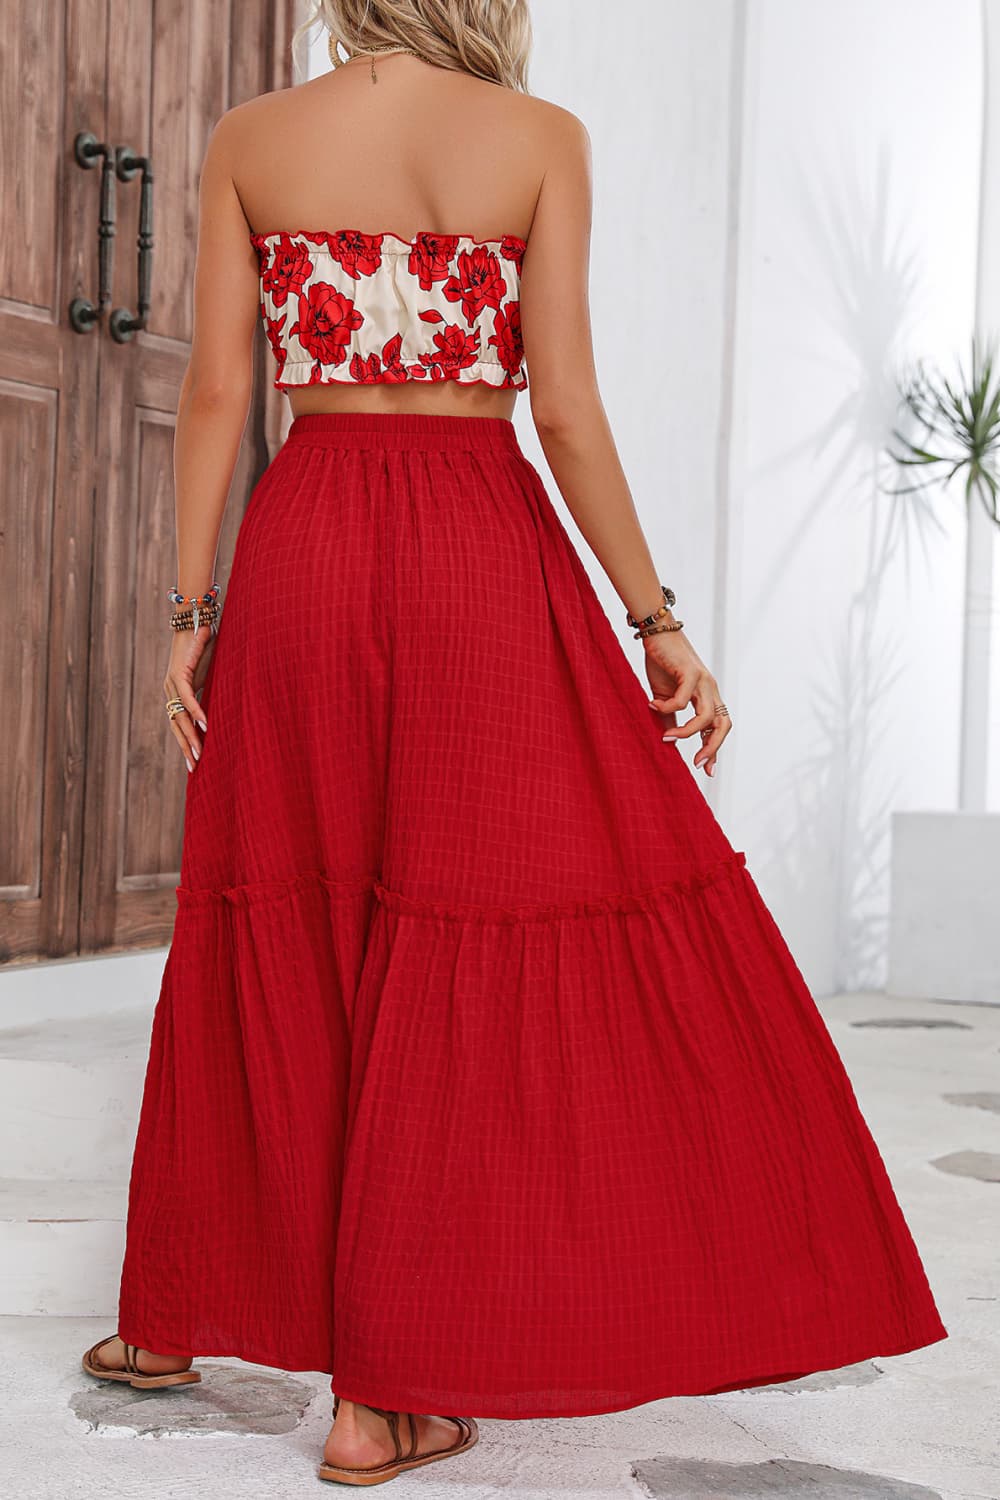 Floral Tube Top and Maxi Skirt Set-Hanny, Ship From Overseas-Deep Red-S-[option4]-[option5]-[option6]-Womens-USA-Clothing-Boutique-Shop-Online-Clothes Minded